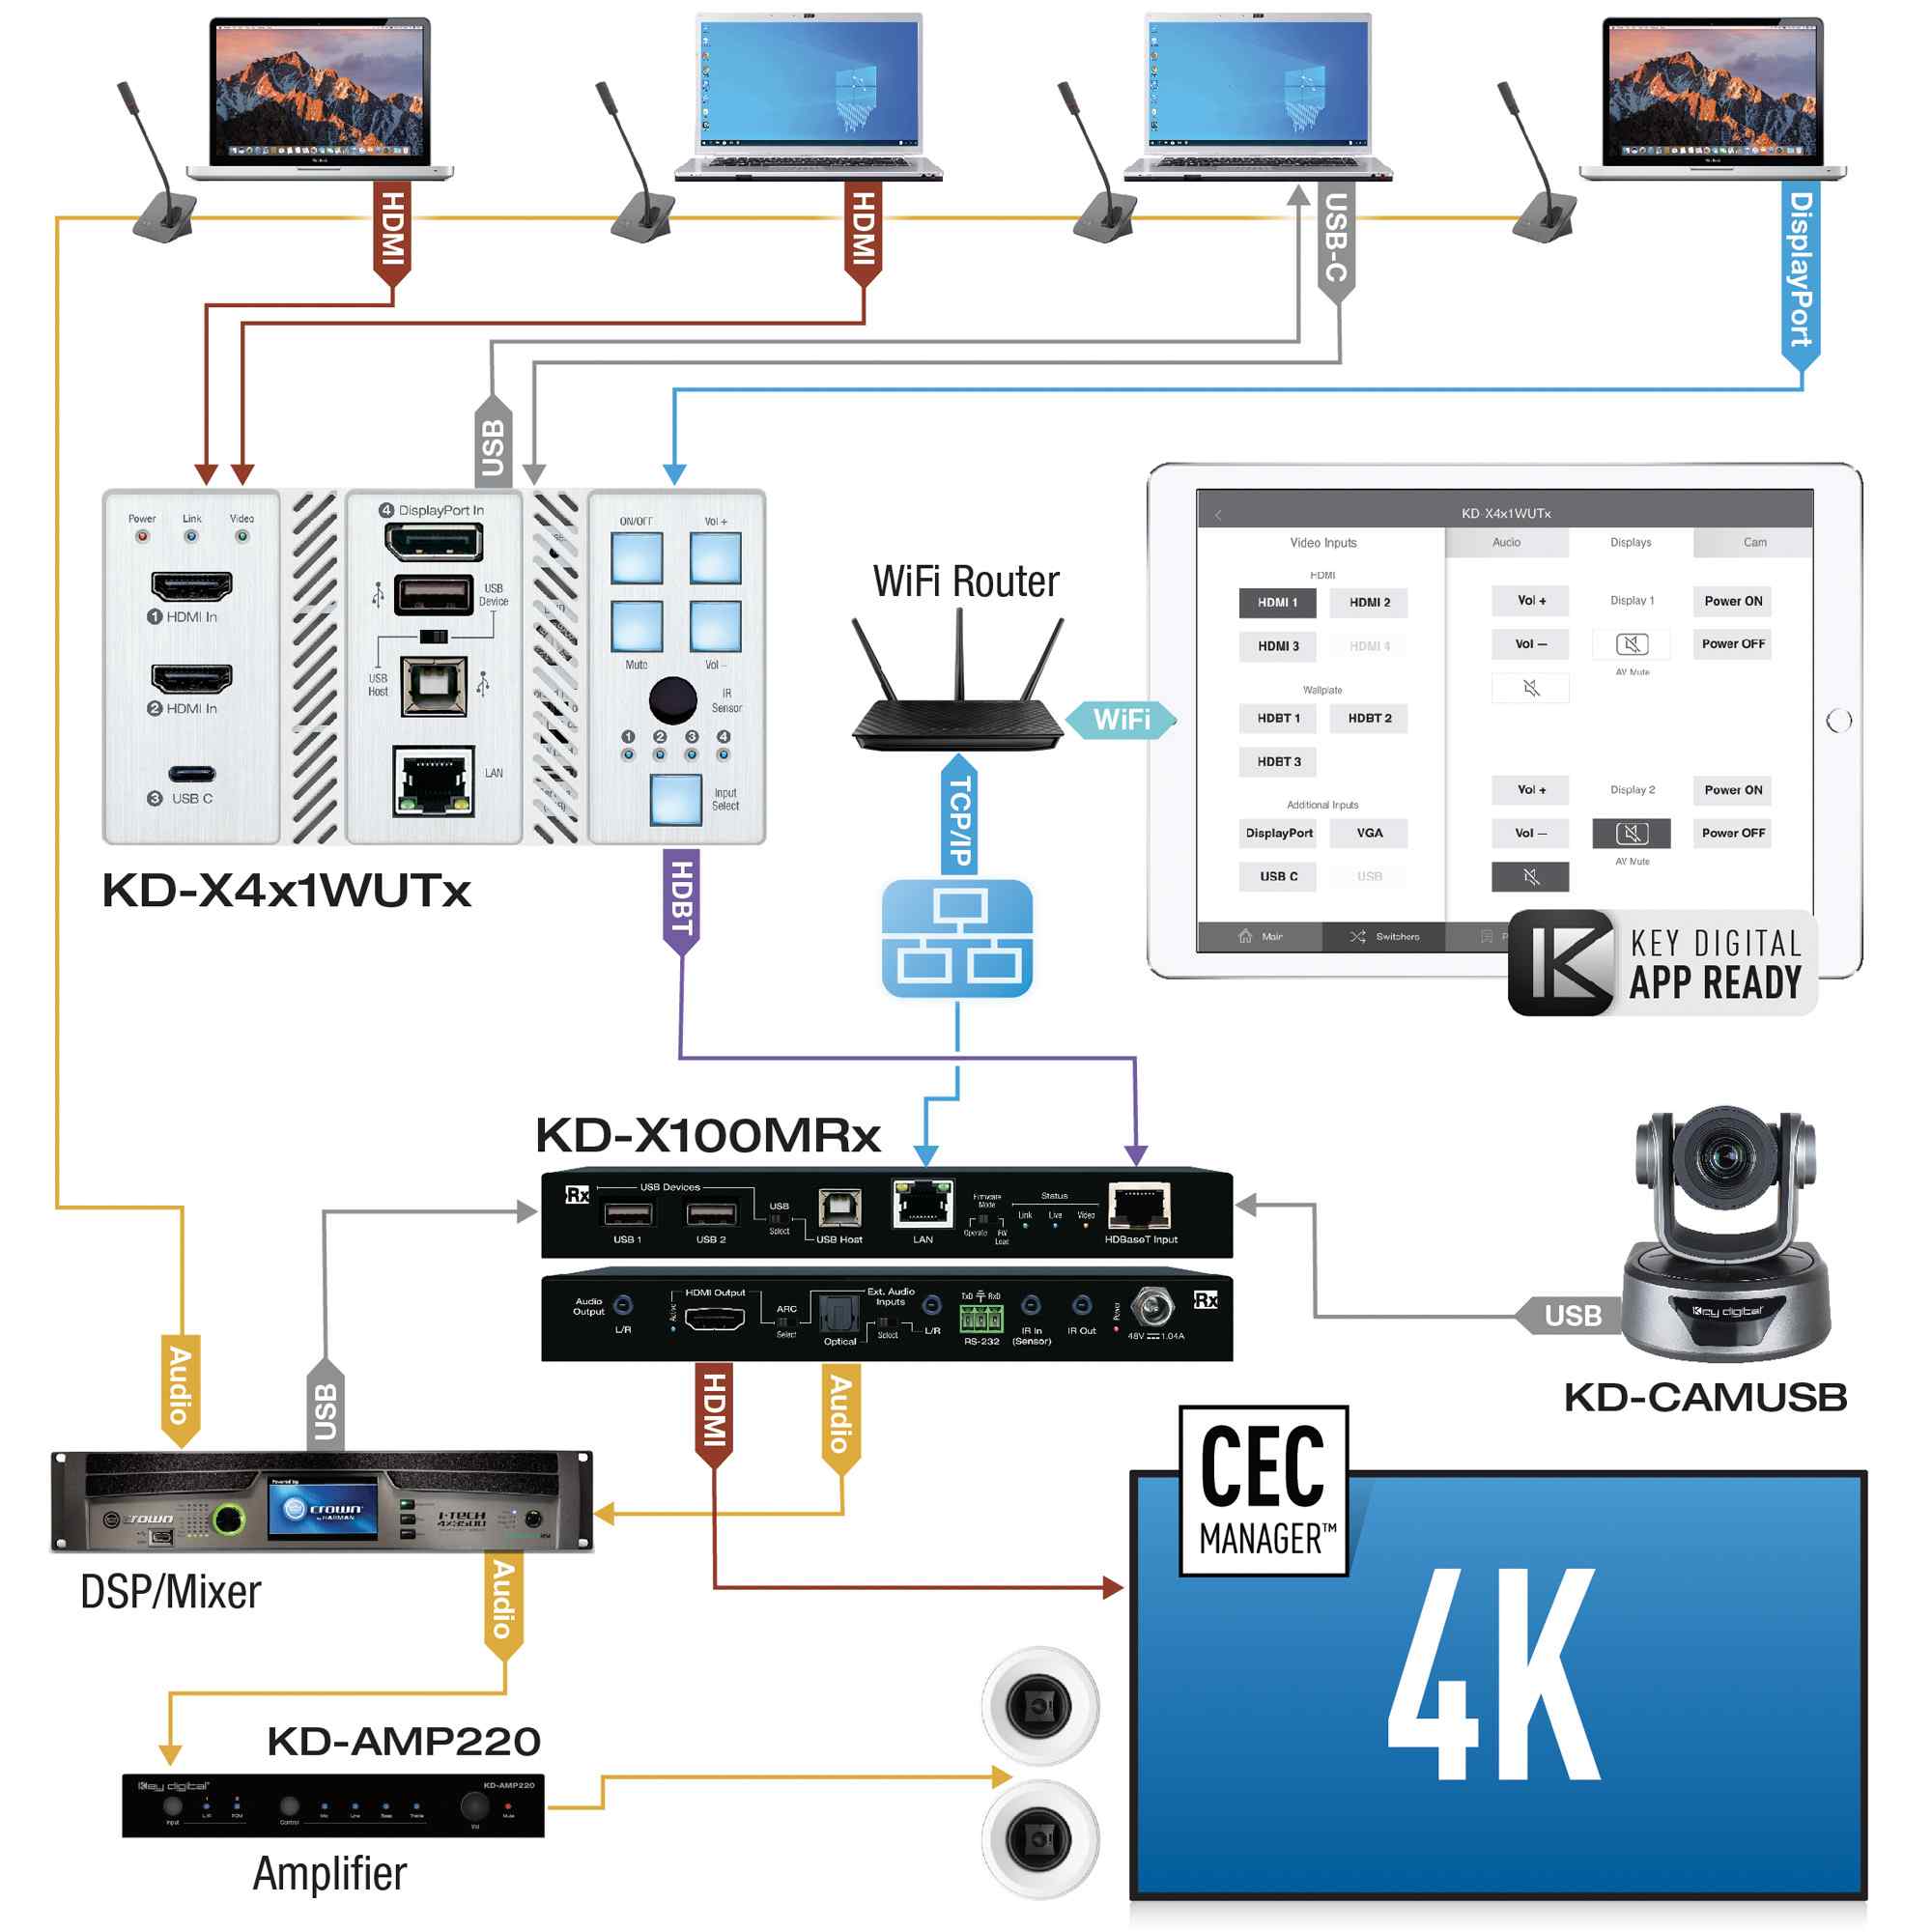 Thumbnail of hdbt management solution for conference space